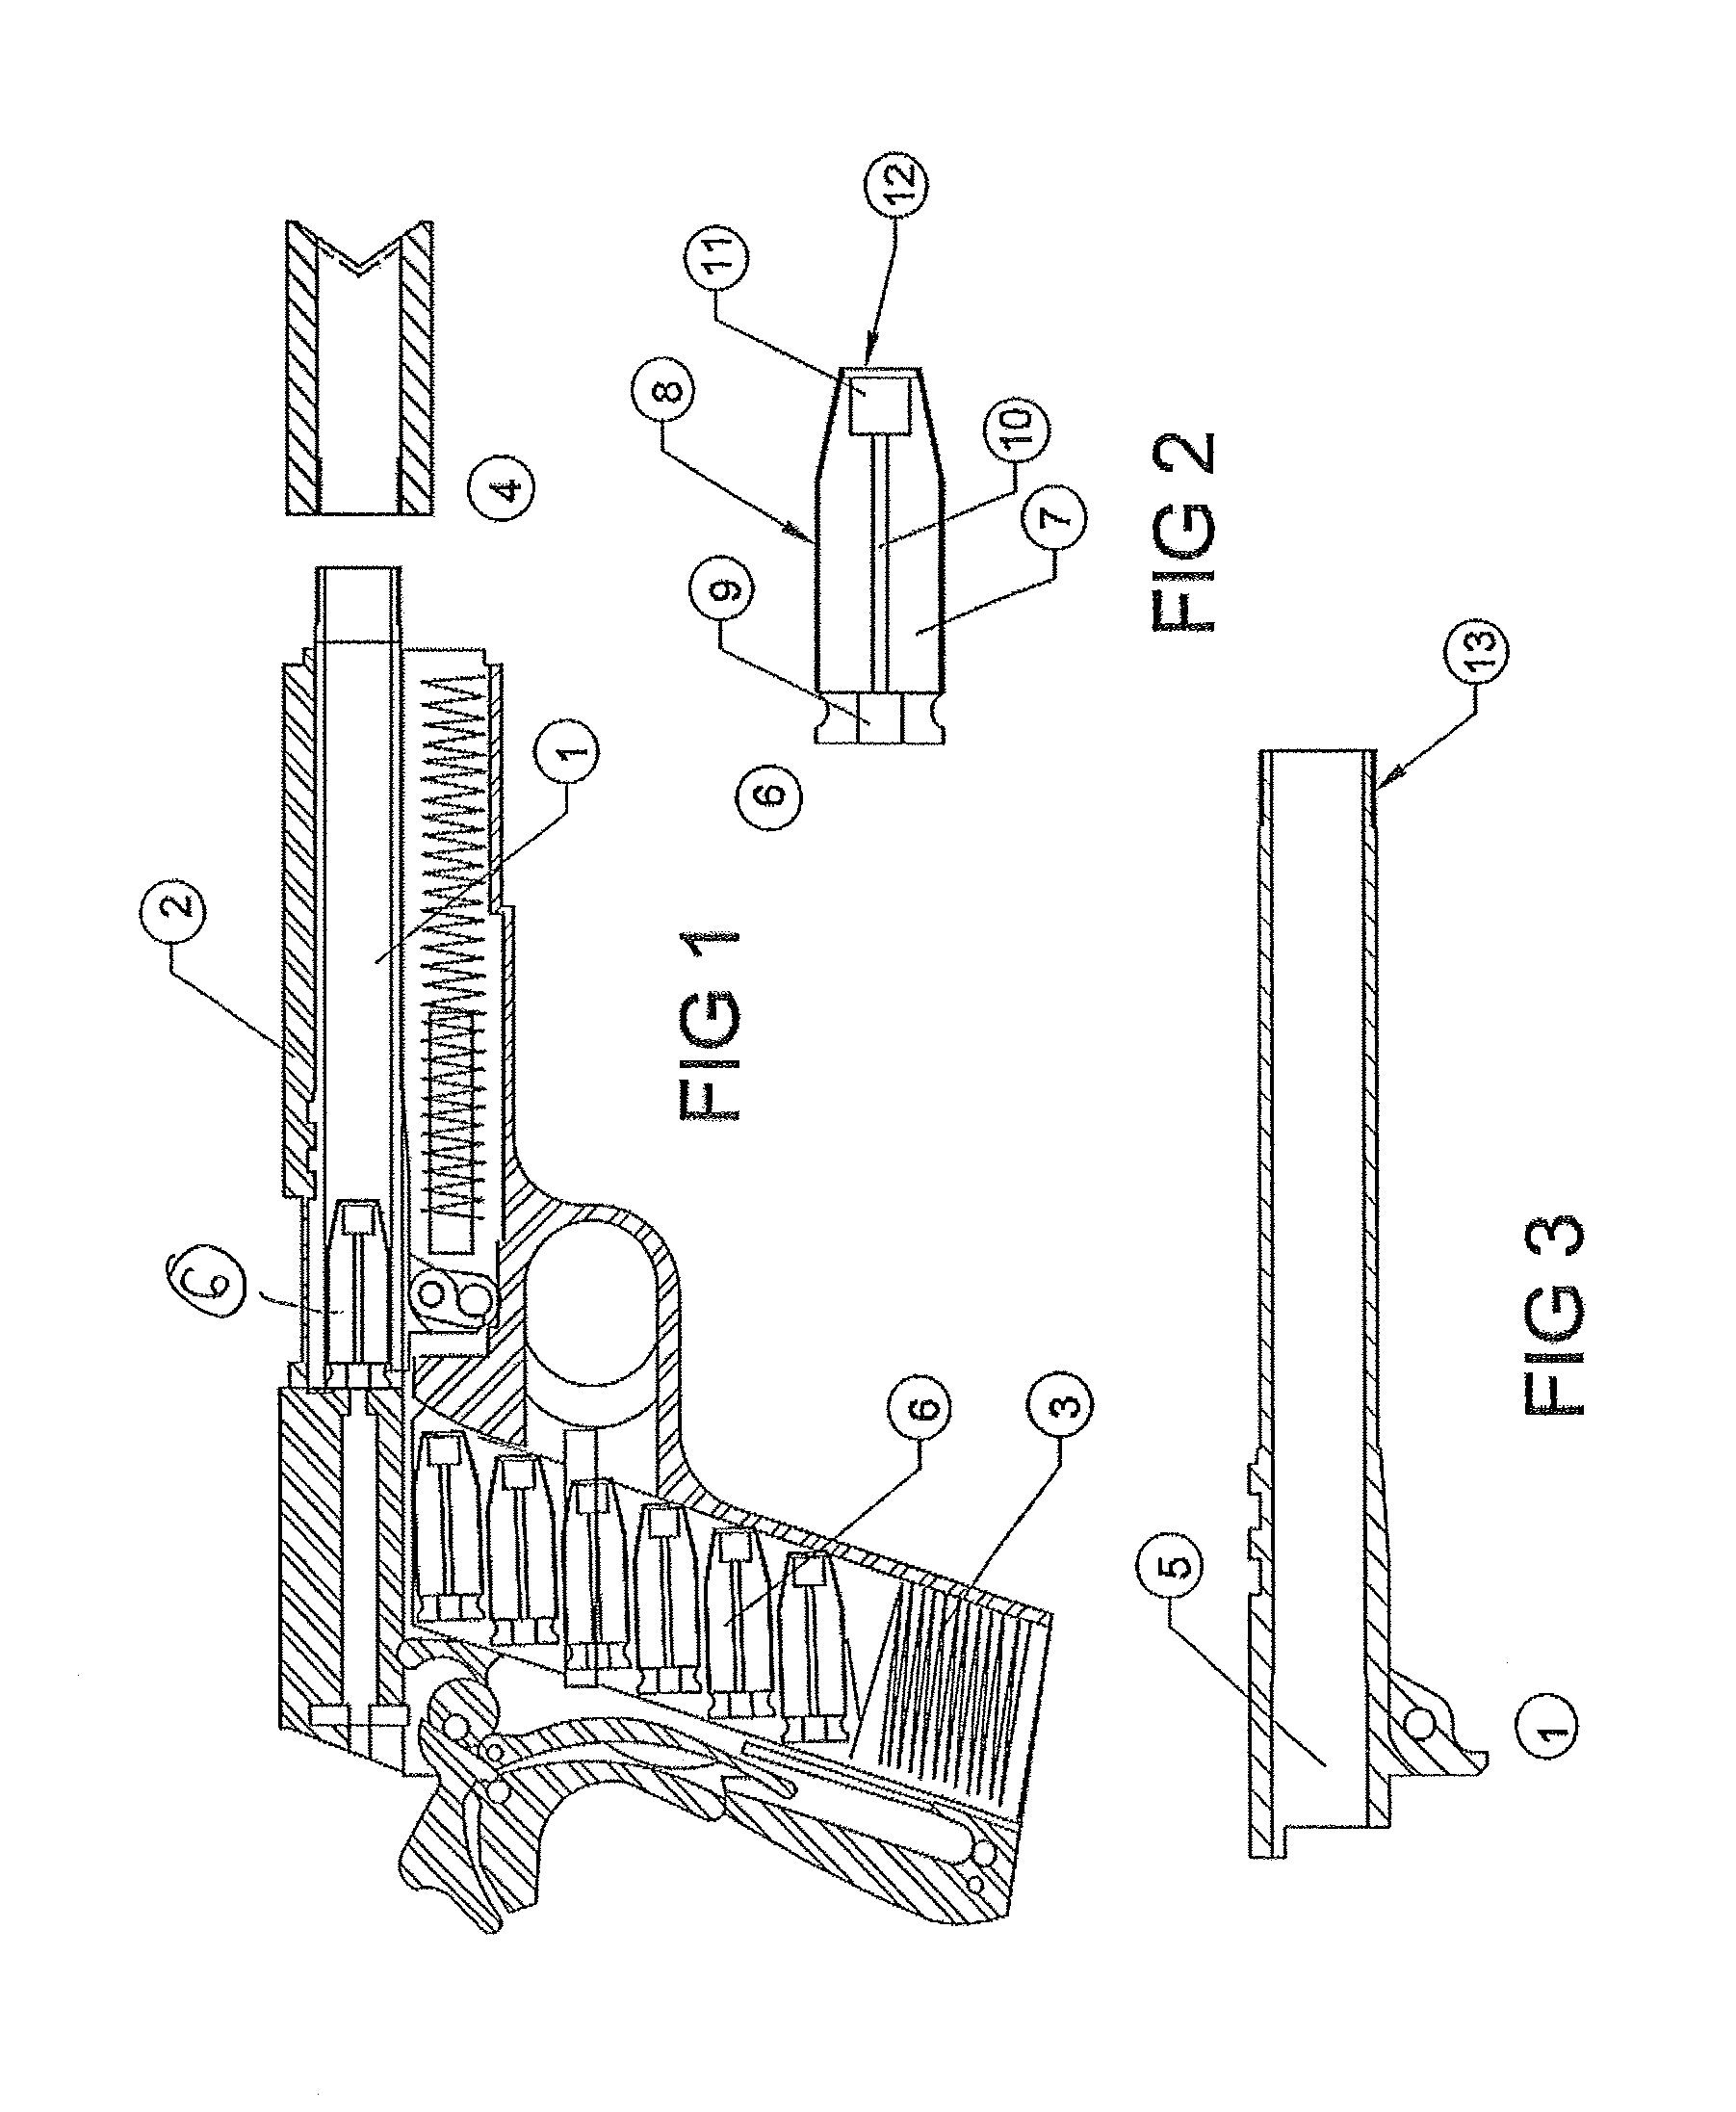 Apparatus for metal cutting and welding